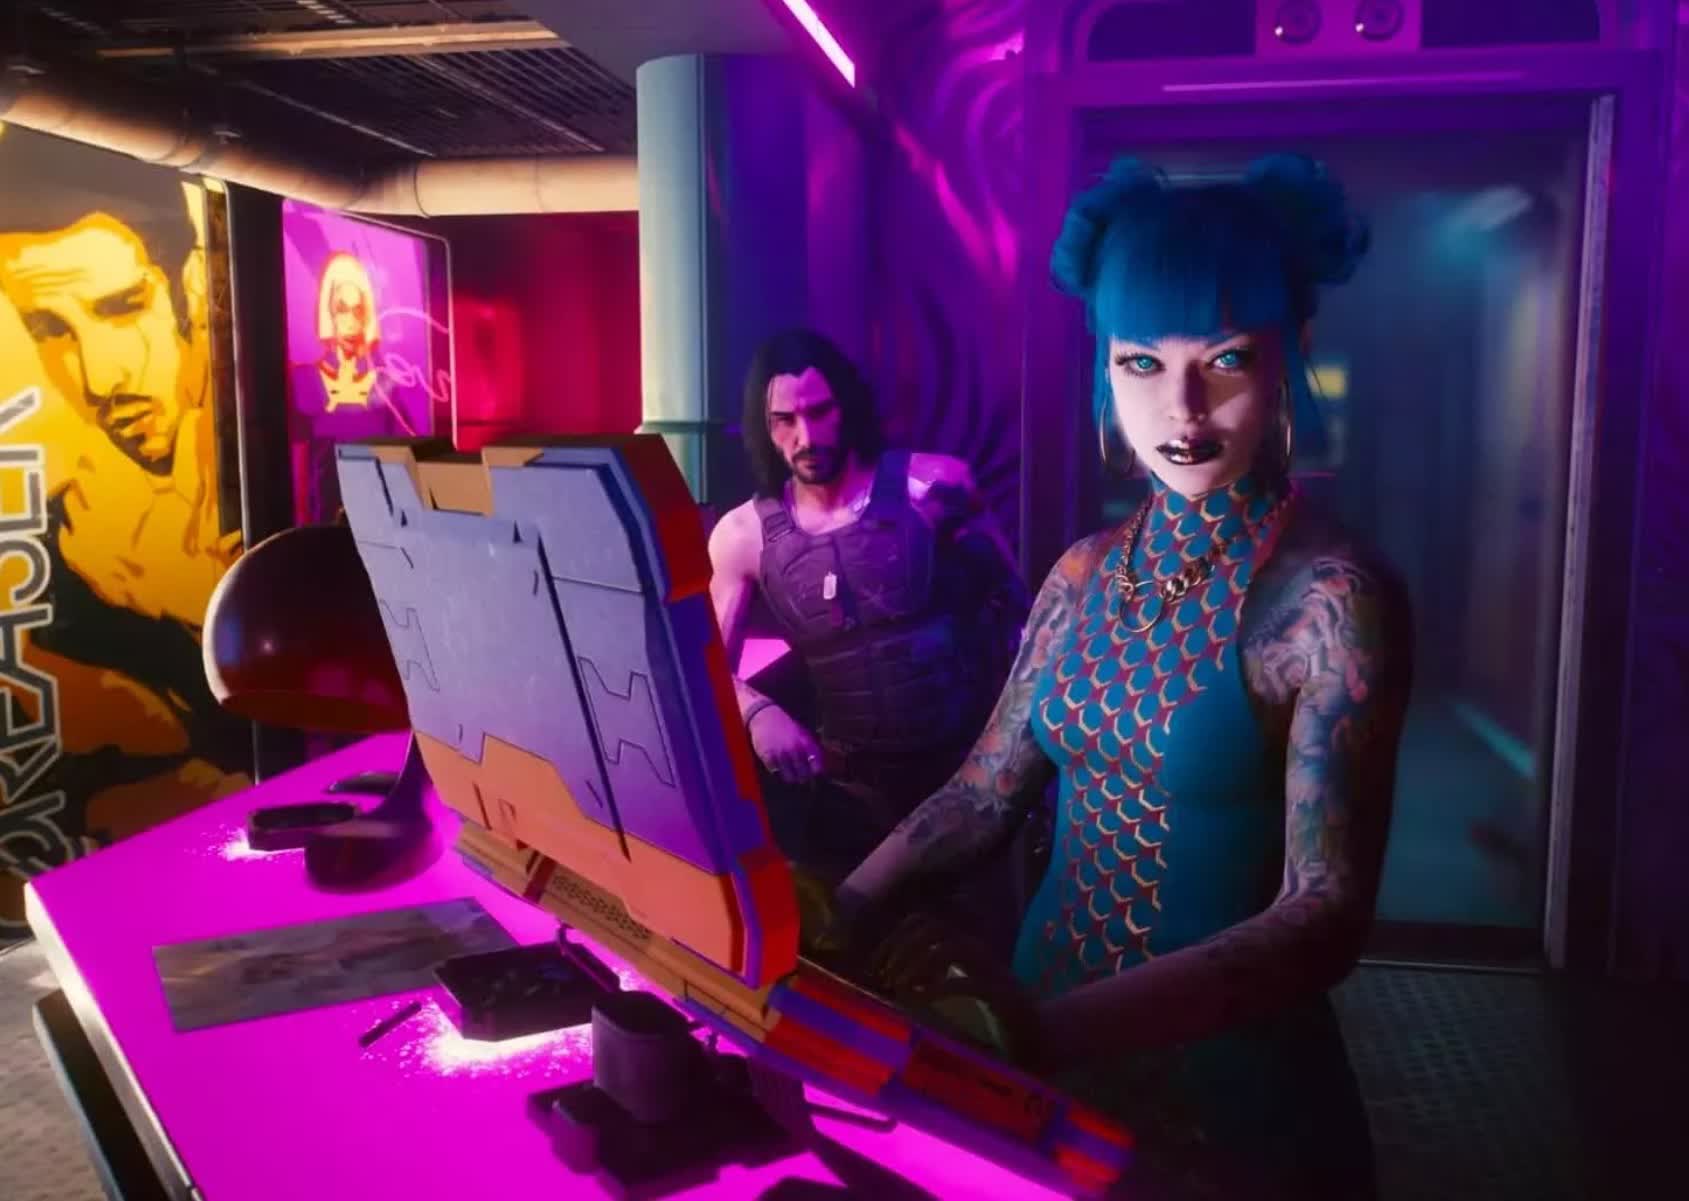 CD Projekt Red hit with ransomware attack, hackers threaten to release Cyberpunk 2077 source code